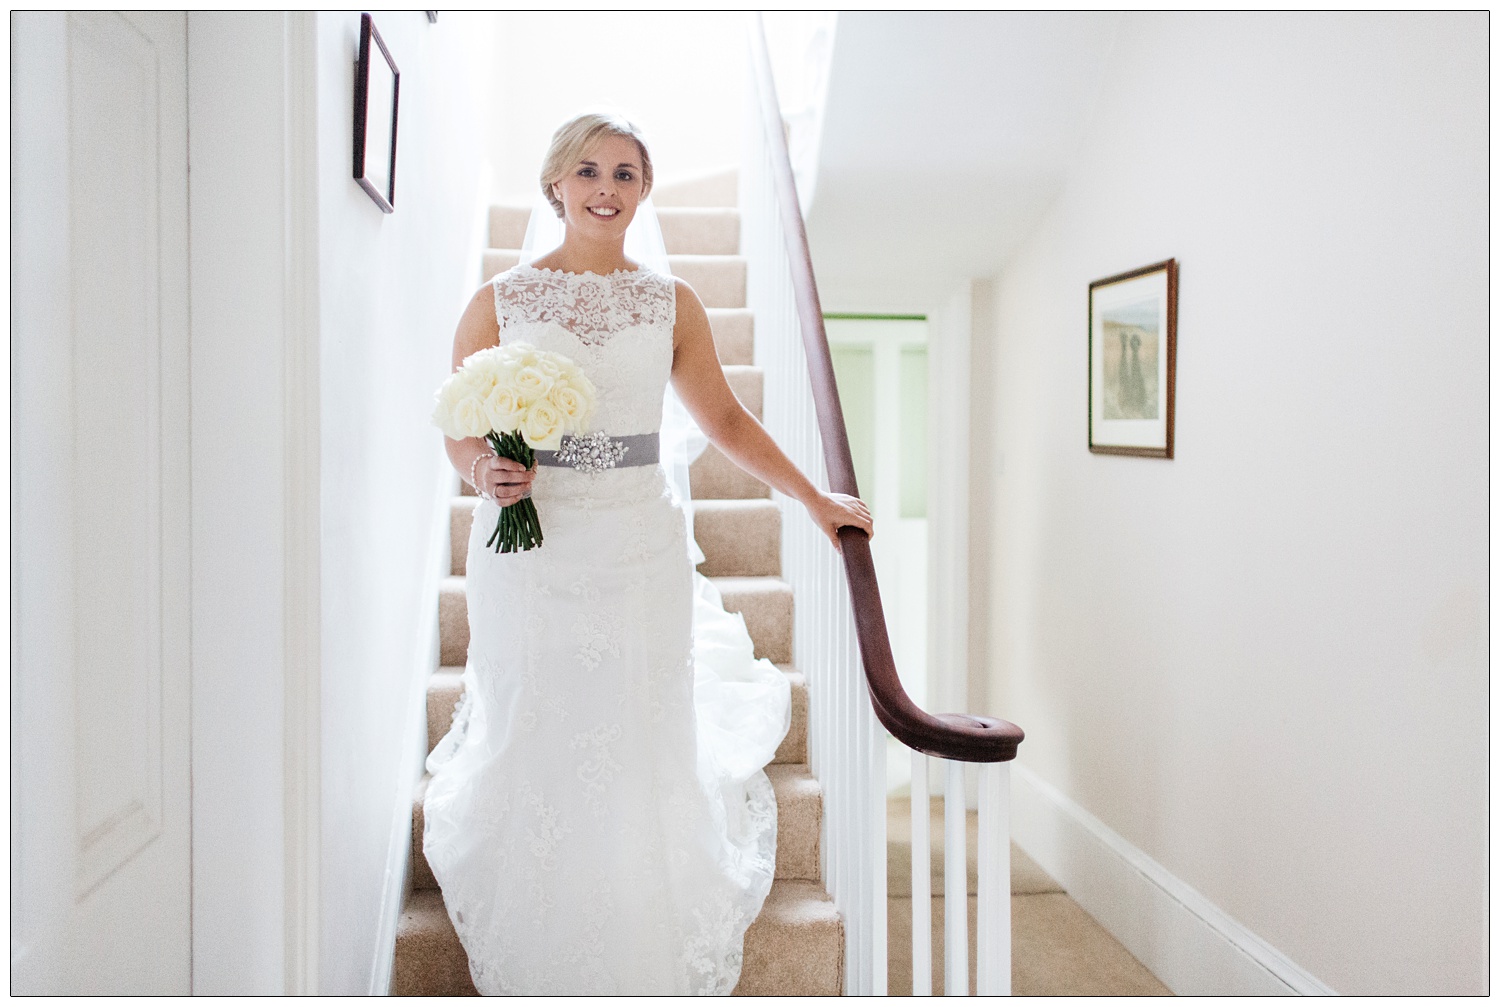 A bride in her lace dress carrying white roses is on the stairs at home.